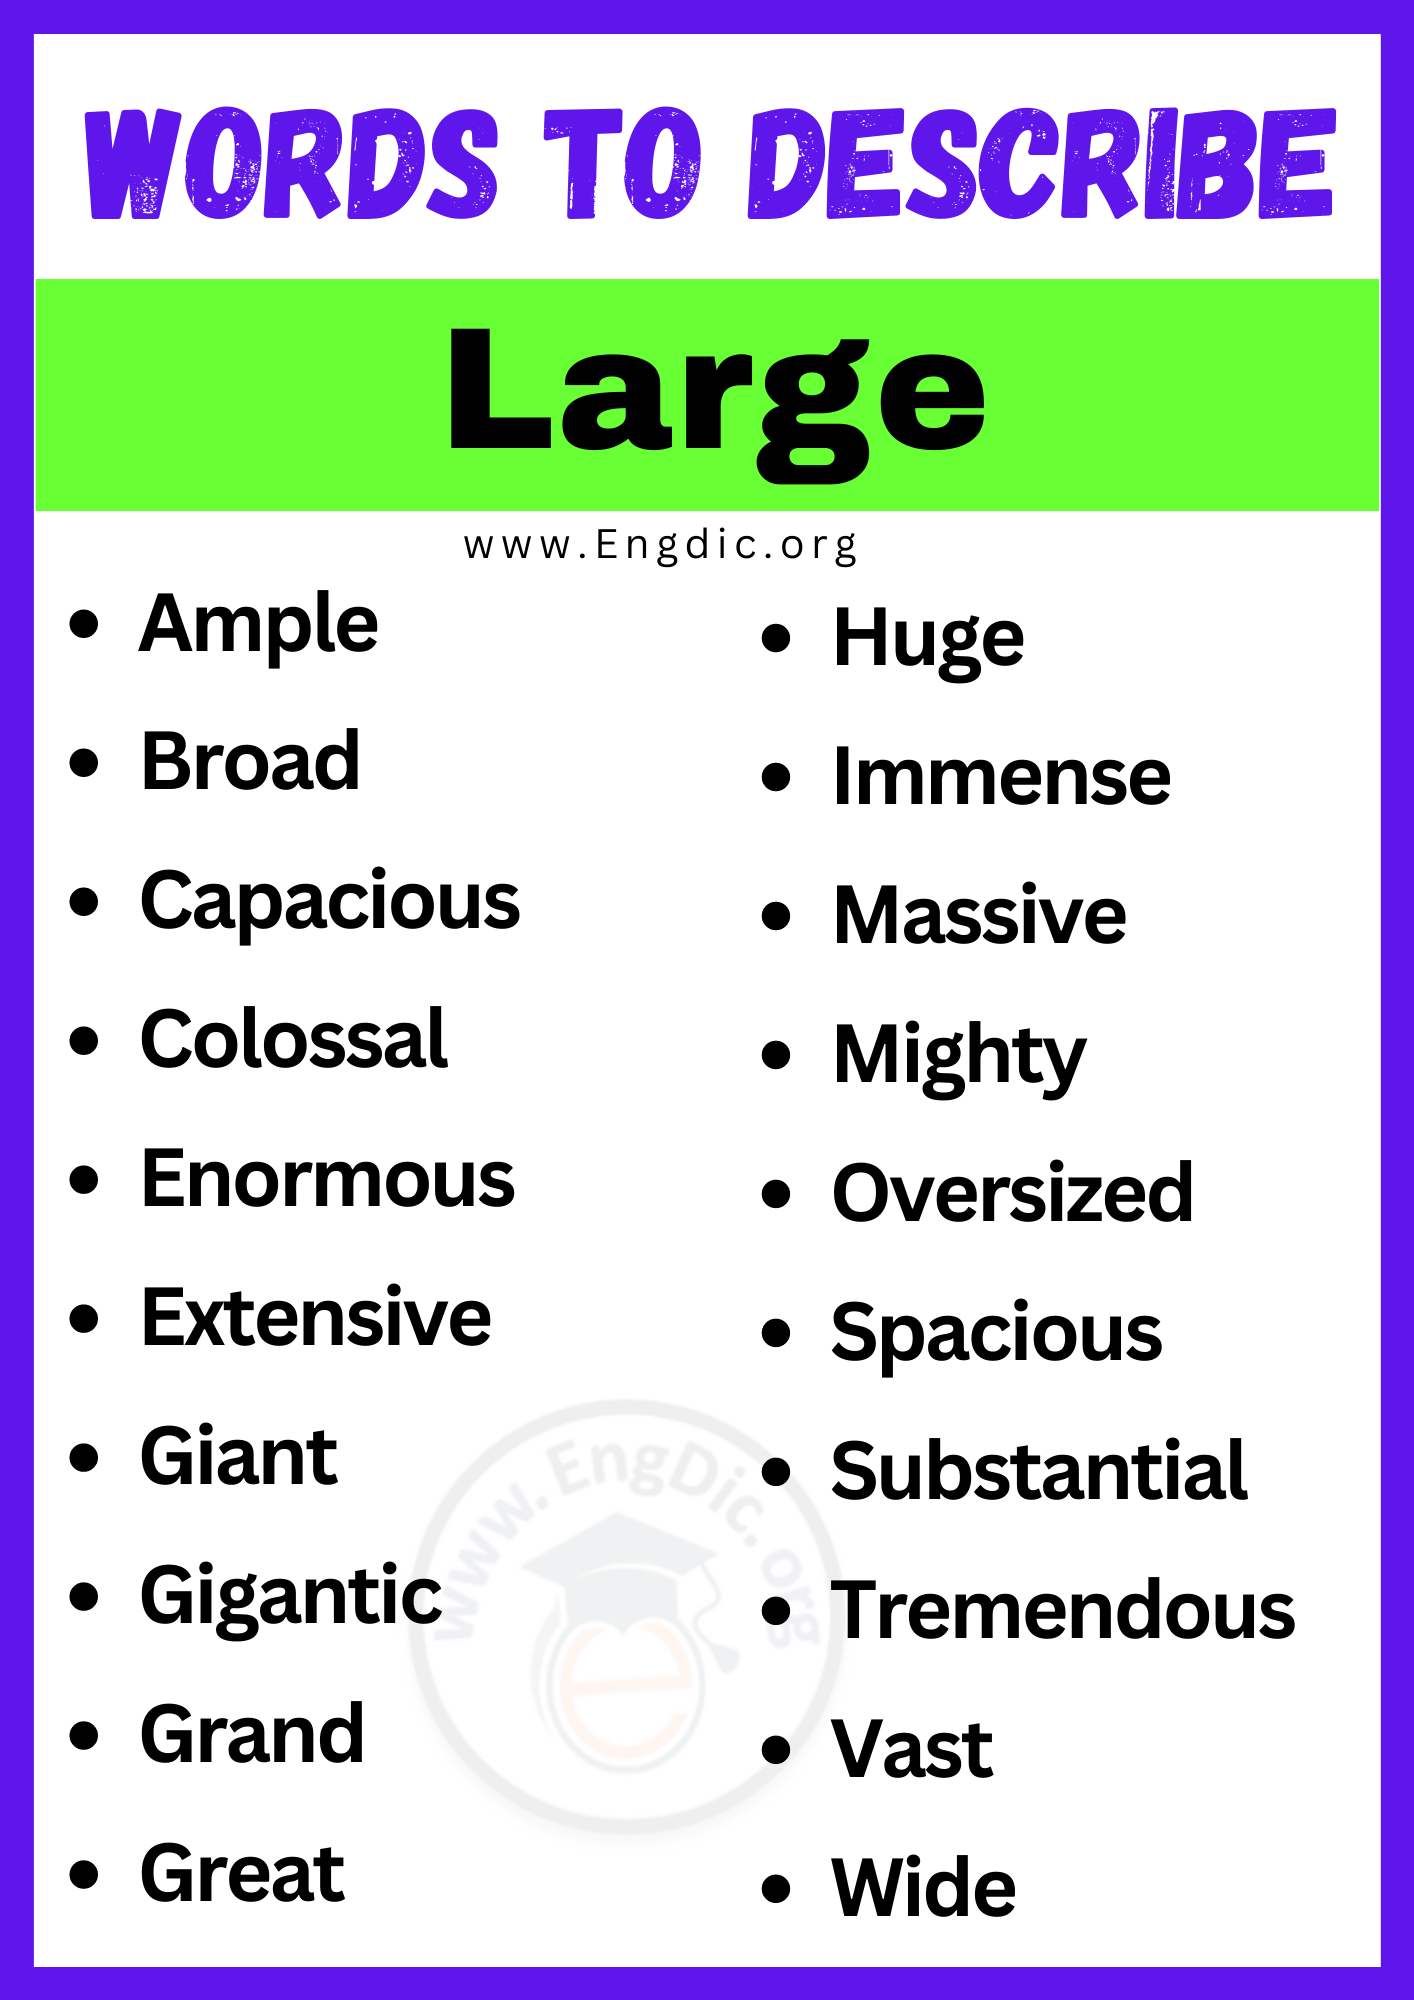 Words to Describe Large